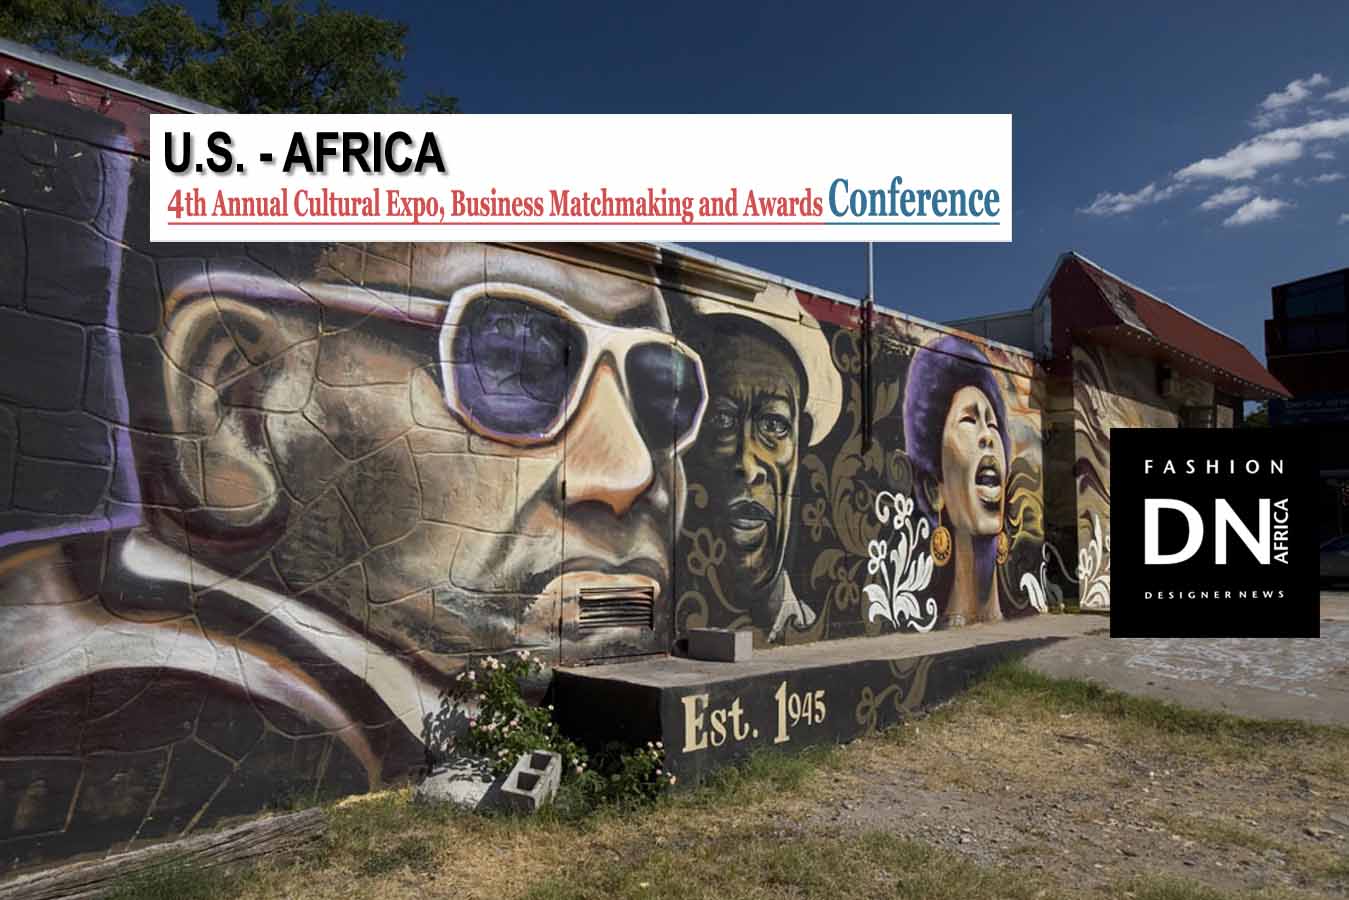 dnafrica-africa-us-business-matchmaking-austin-texas-2018